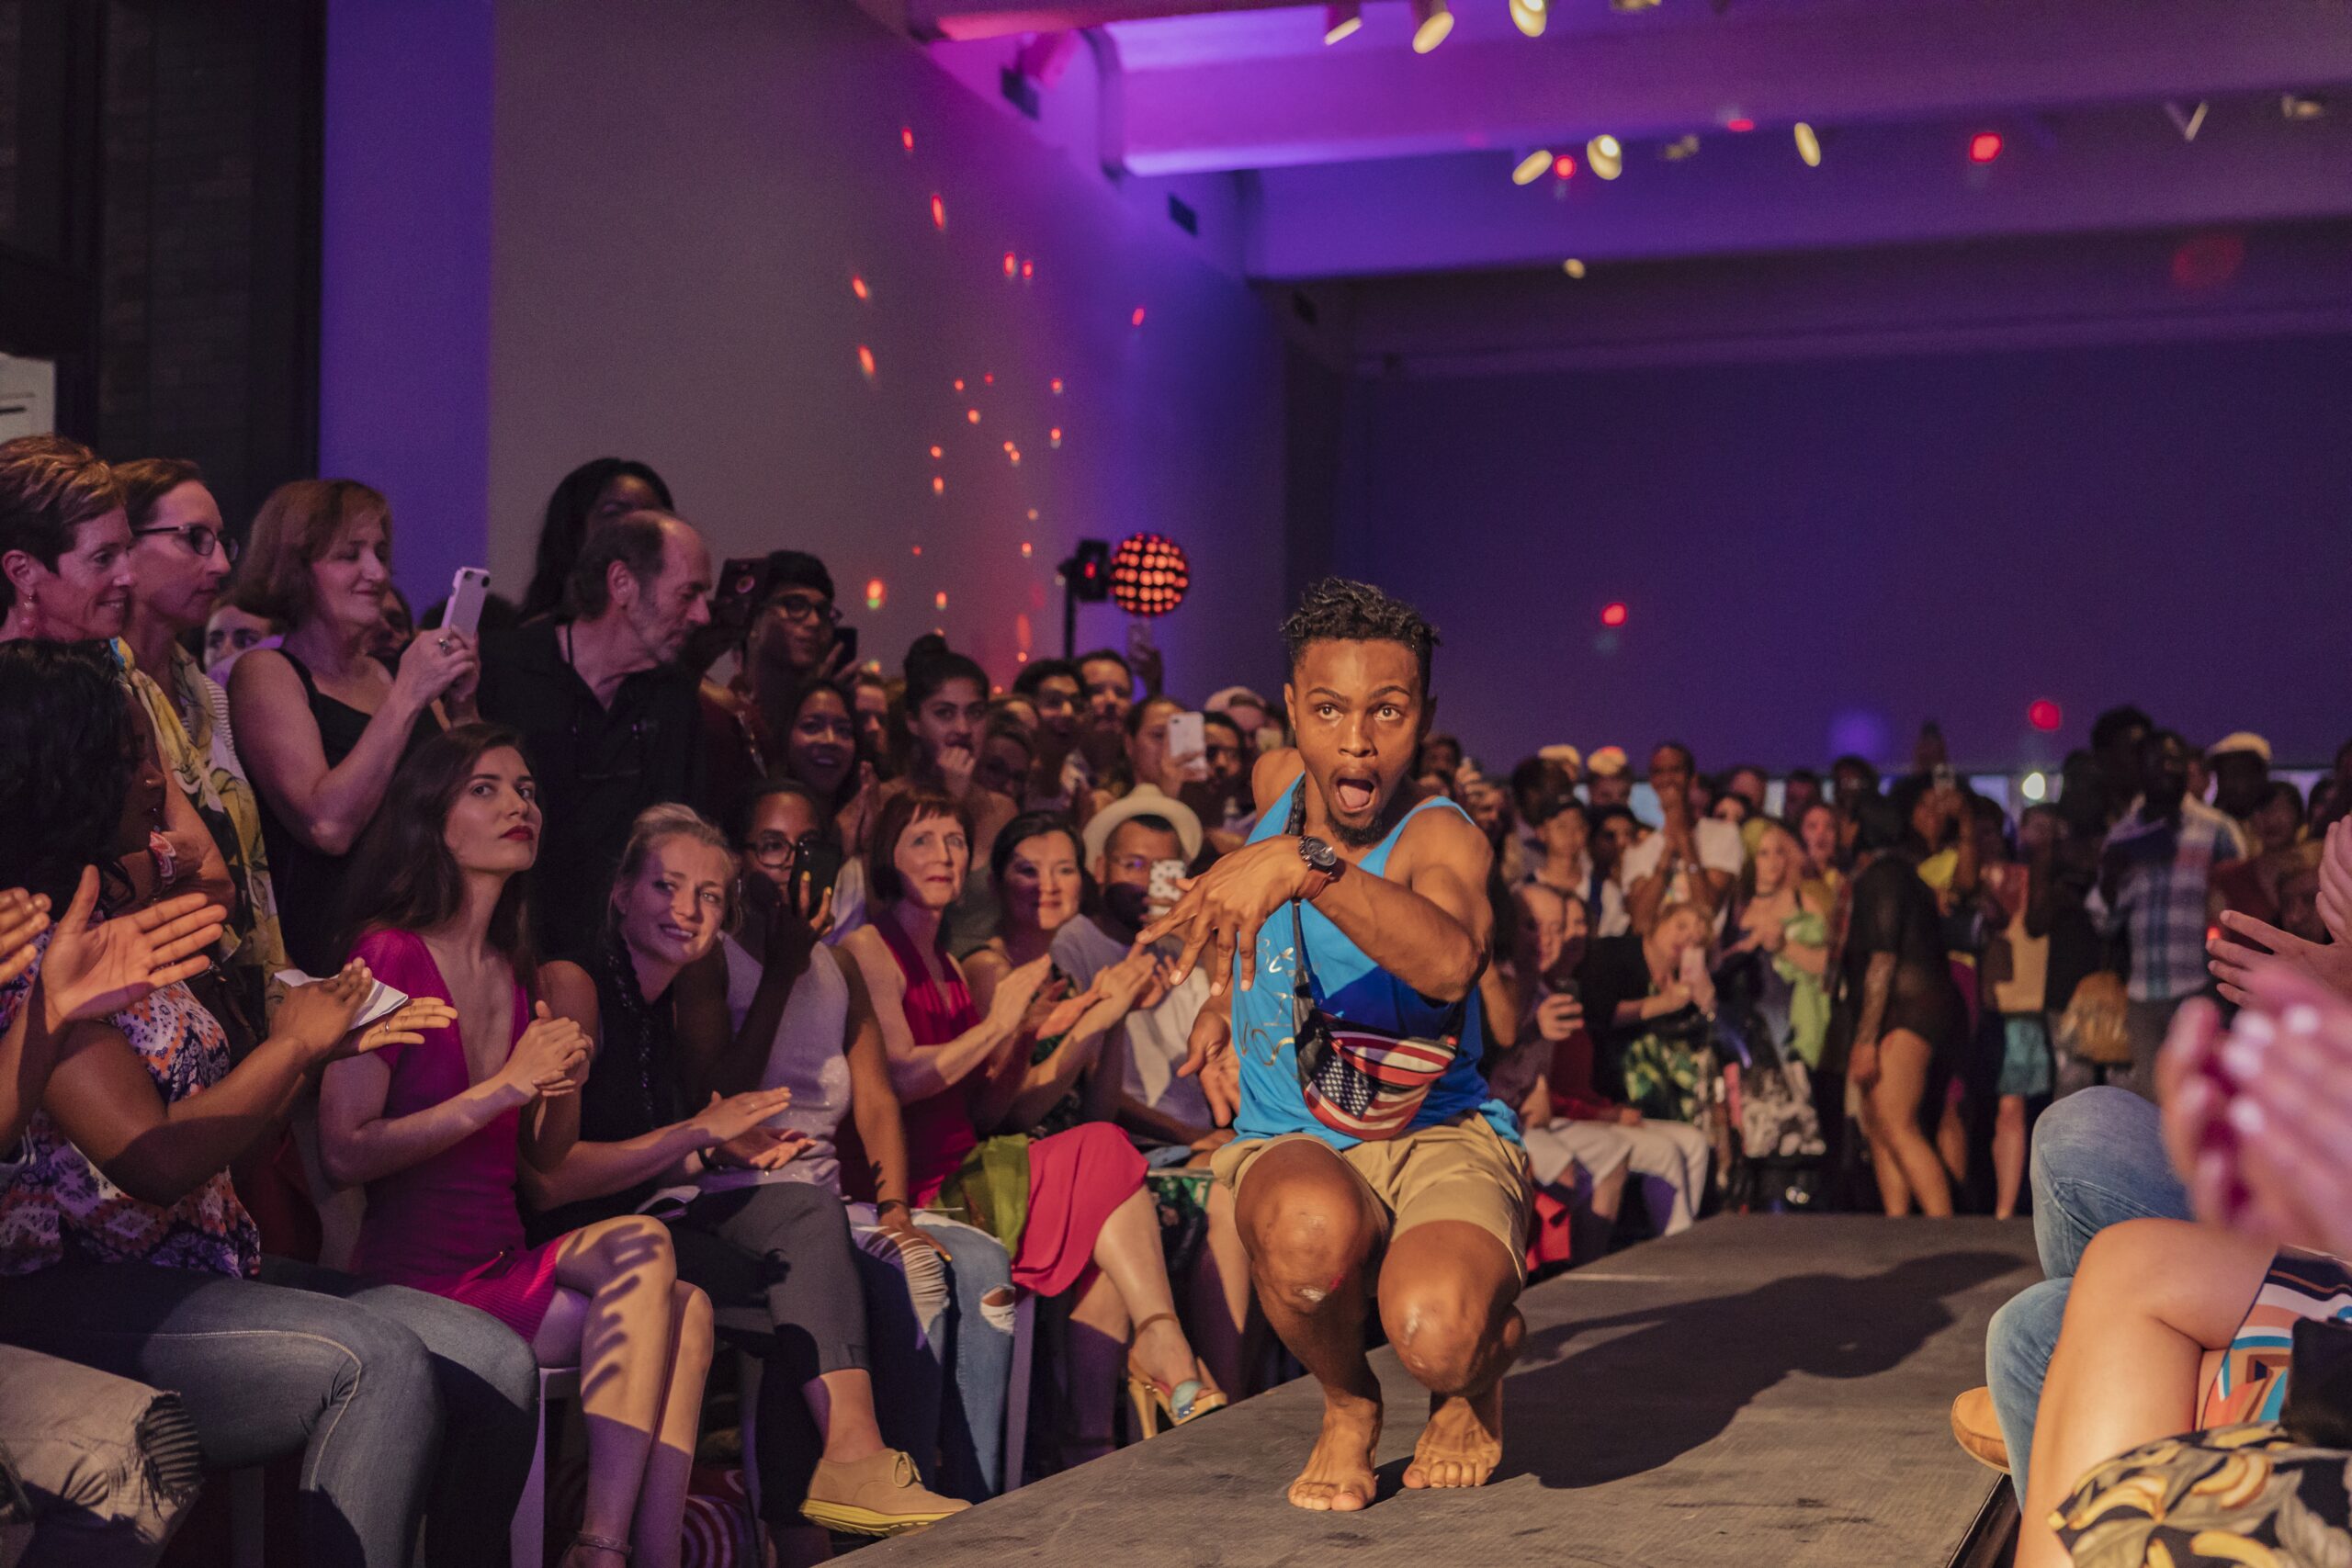 Person with dark skin performs duck walk on runway, with crowd and purple lighting behind them.